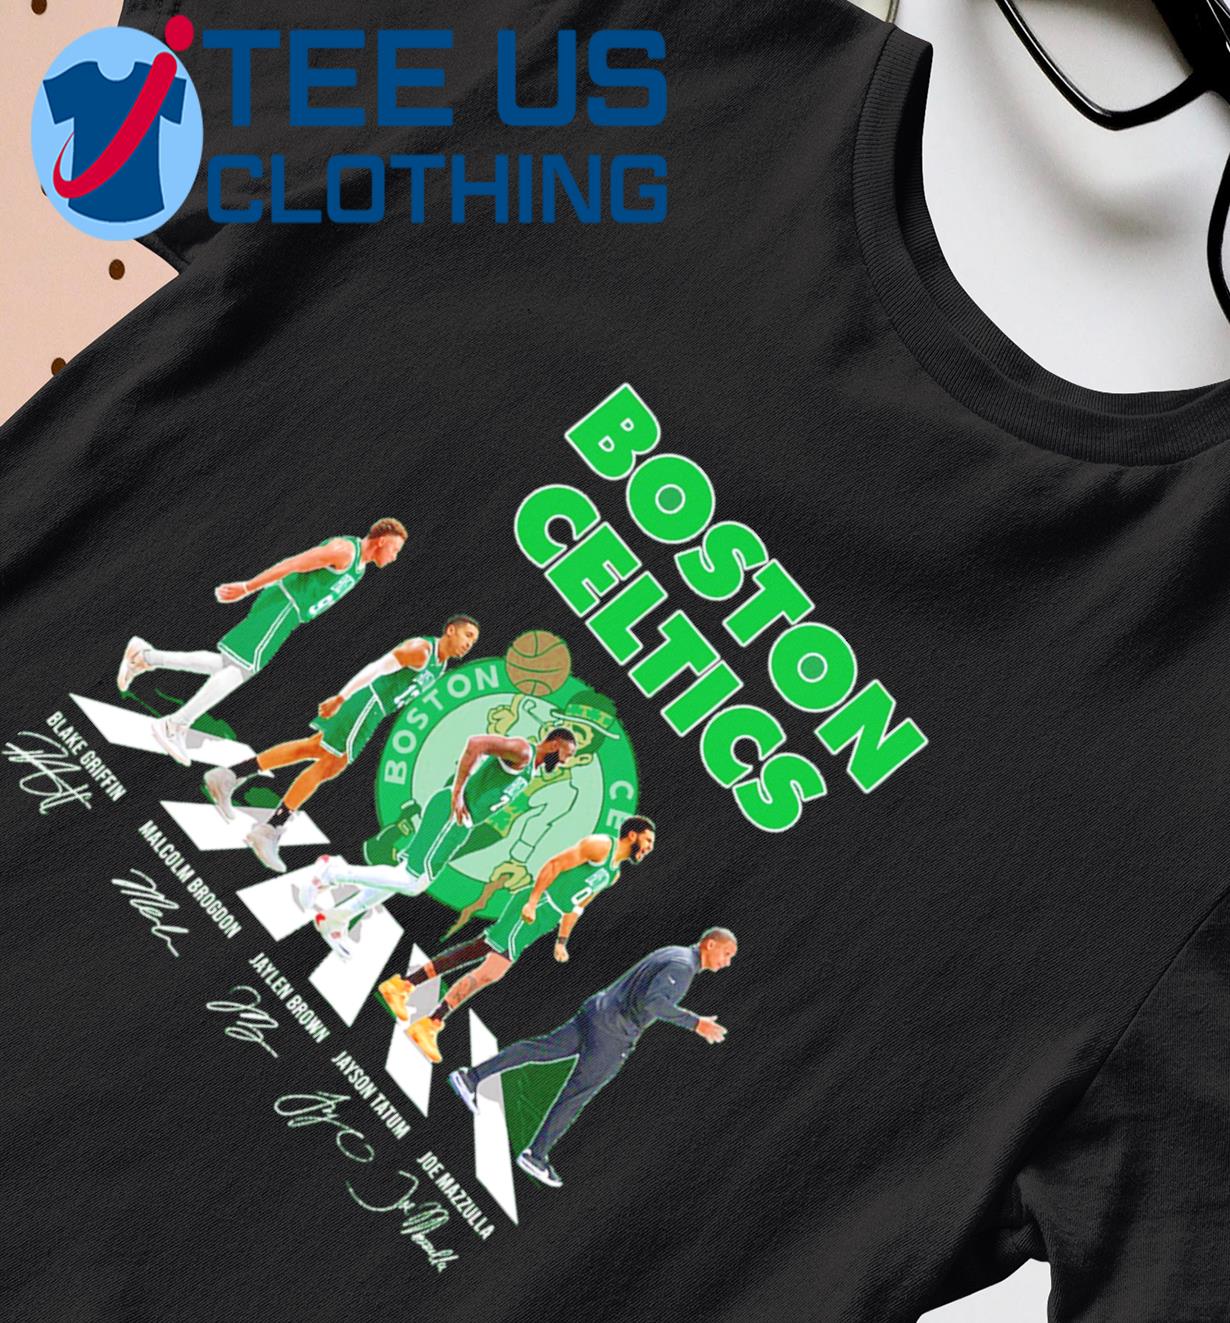 Boston Celtics The Legends Abbey Road Signatures Shirt, hoodie, sweater,  long sleeve and tank top